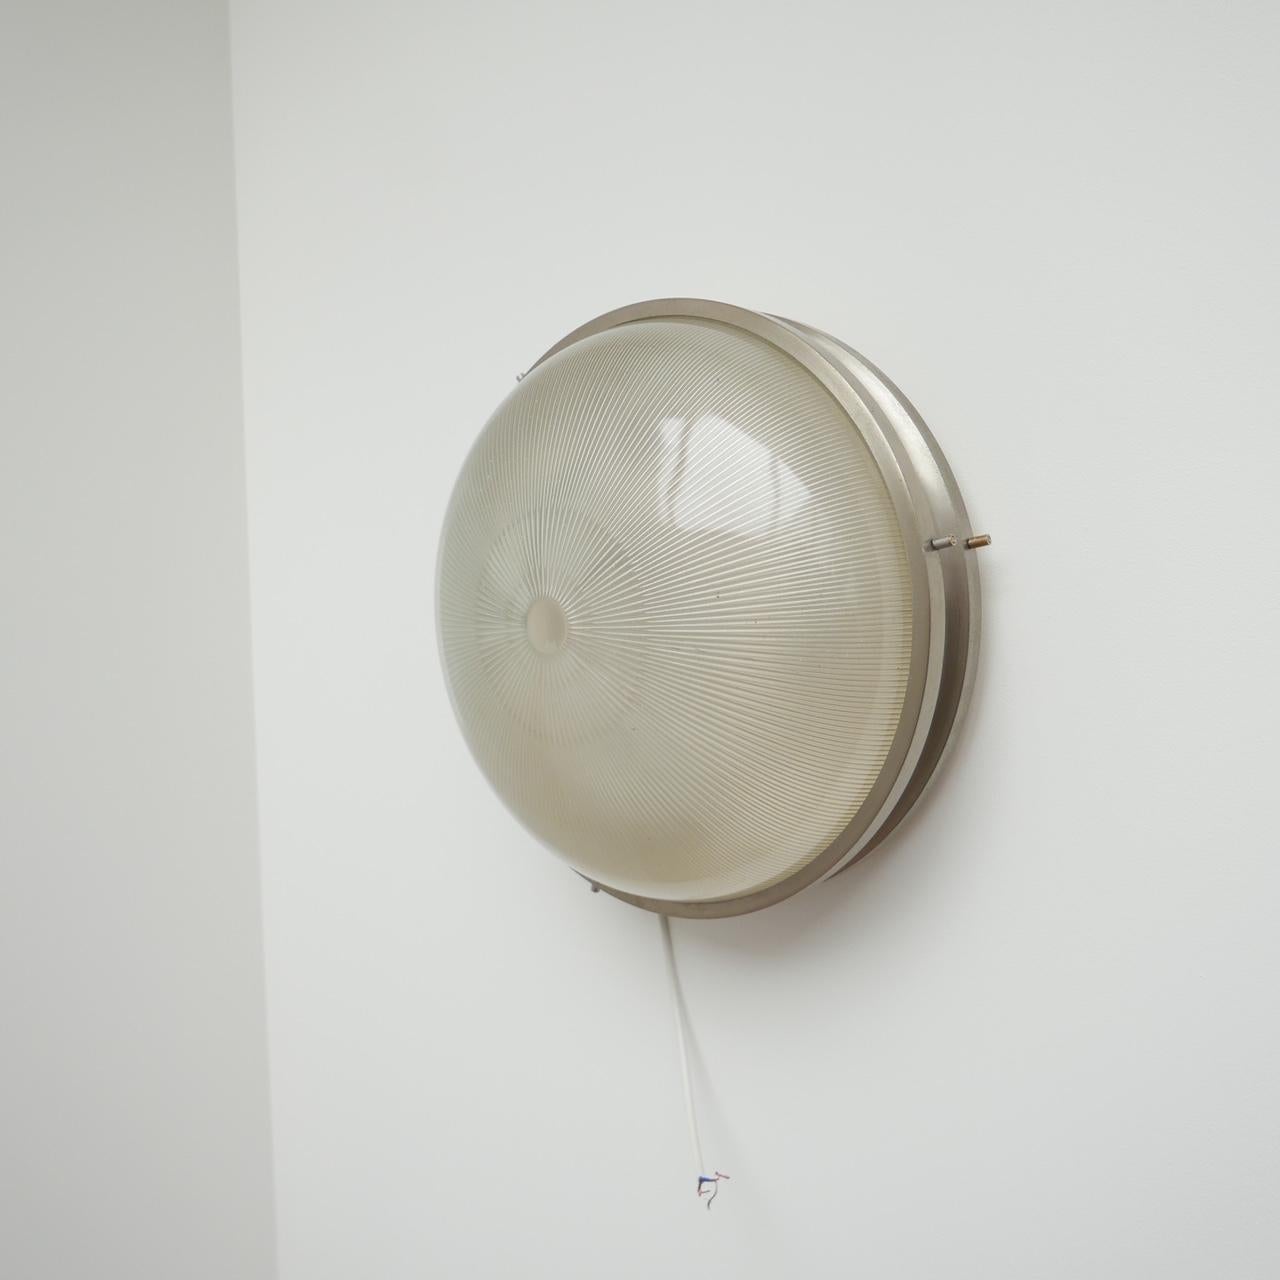 Sergio Mazza 'Sigma' Wall/Ceiling Lights for Artemide In Good Condition For Sale In London, GB